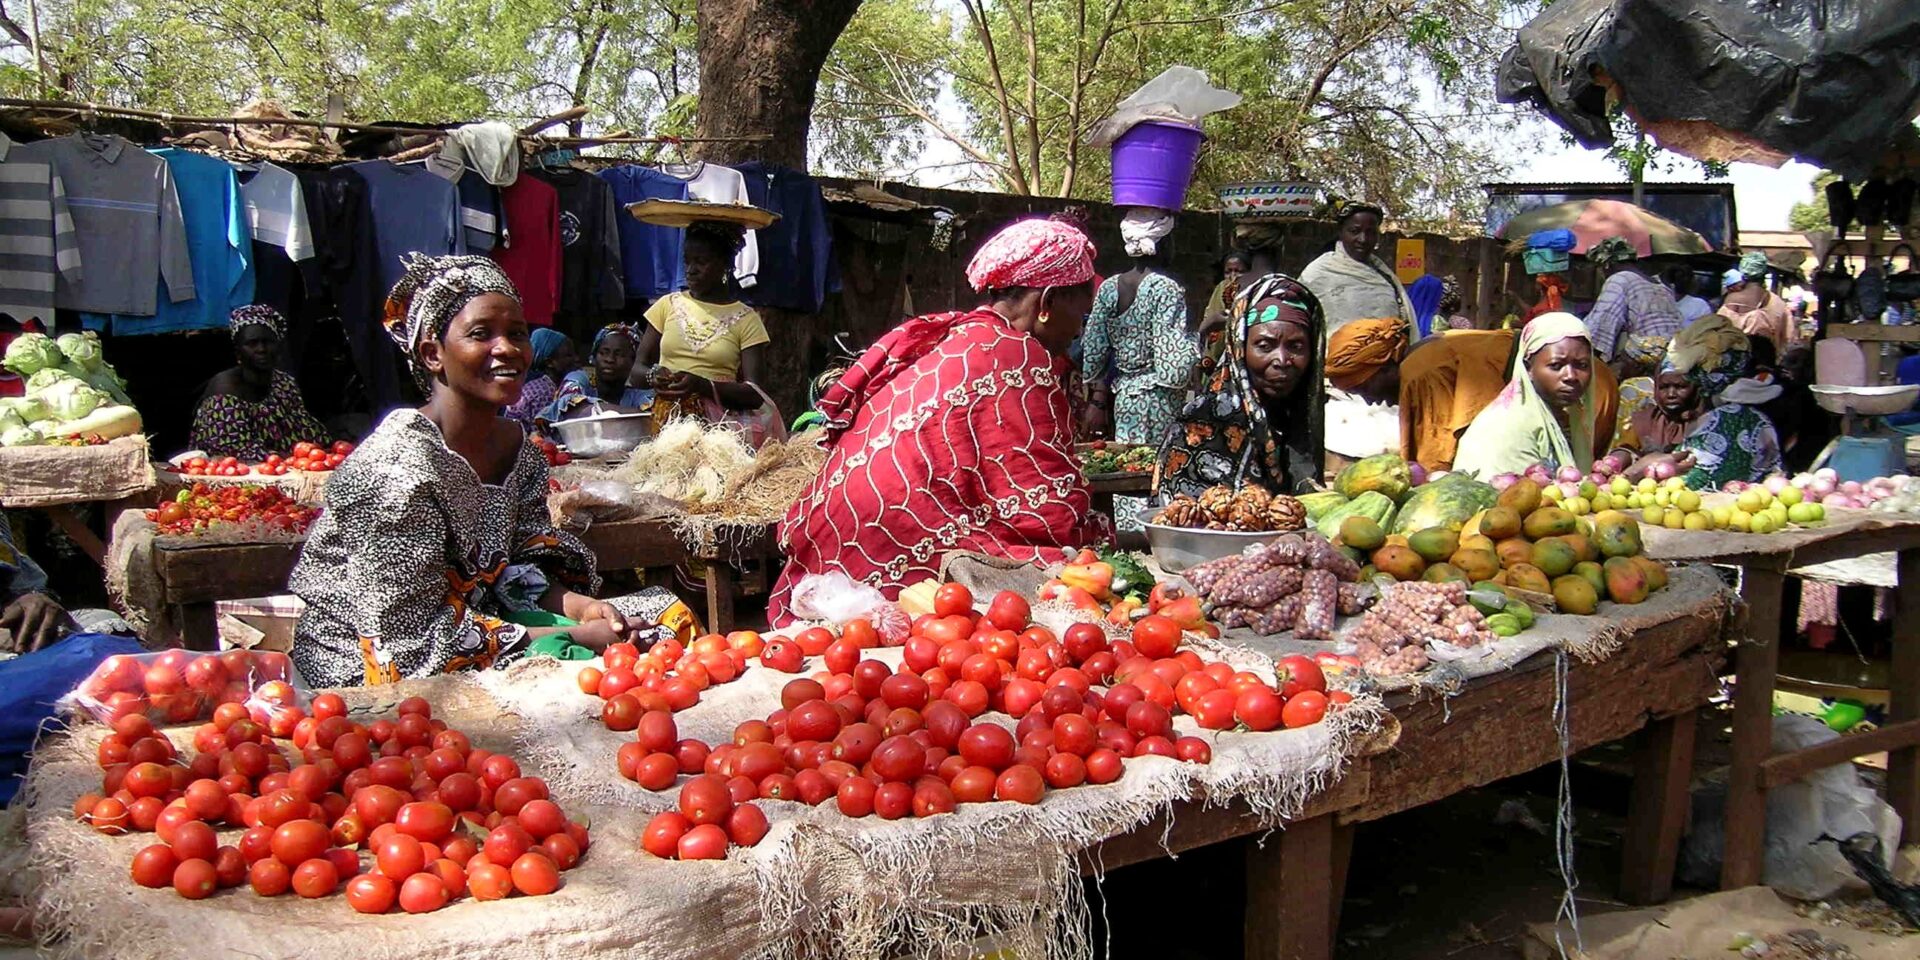 Women sell fruit and vegetables at a market in Sikasso, Mali.